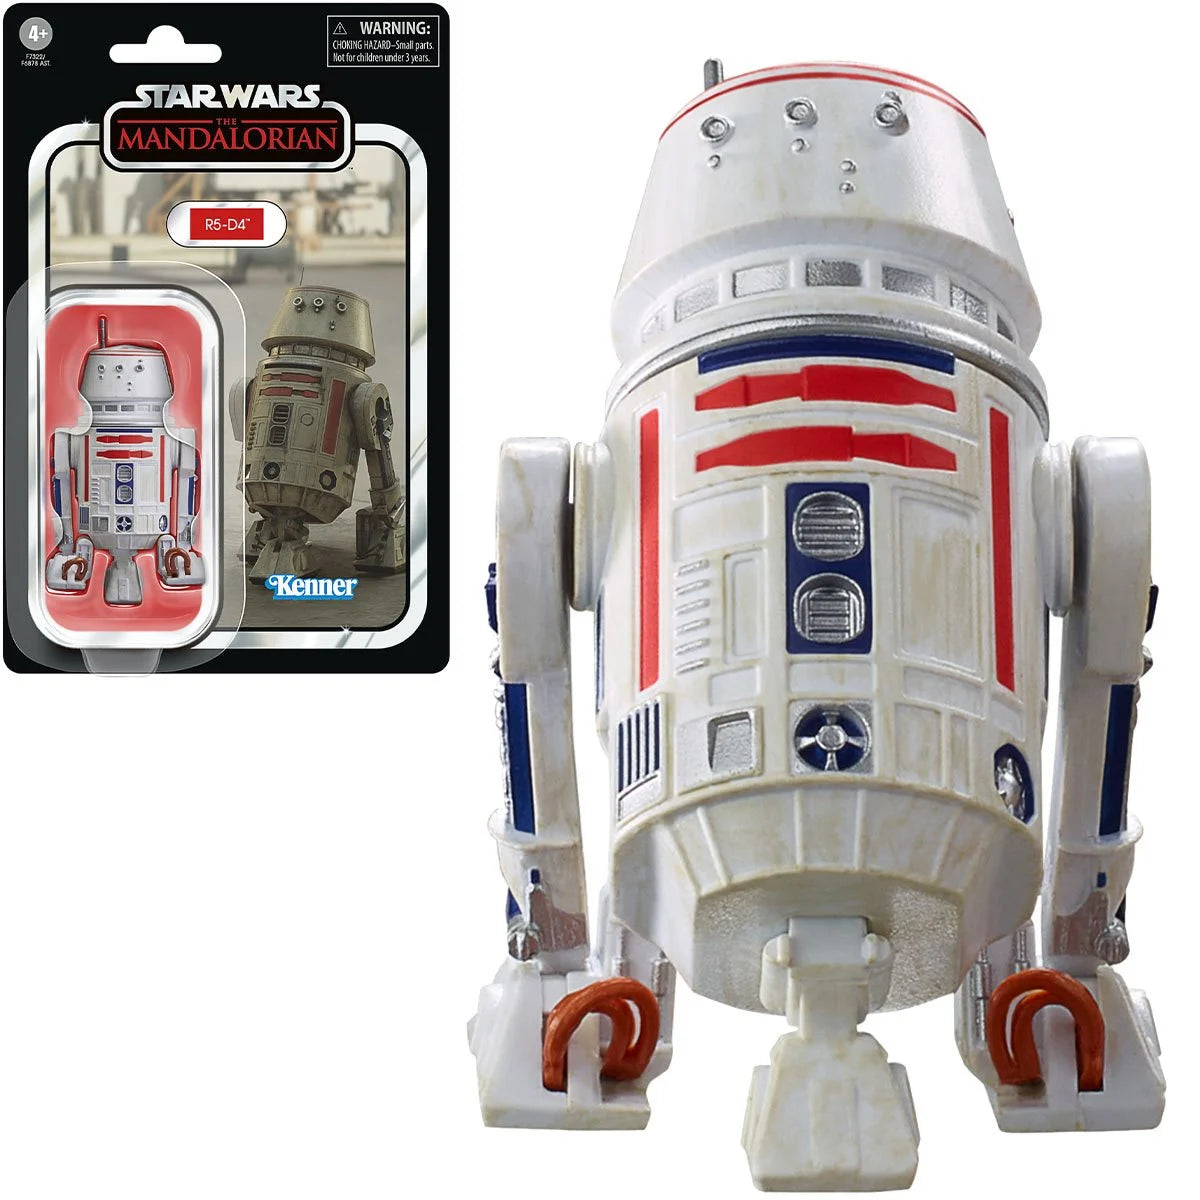 Star Wars: The Vintage Collection R5-D4 Hasbro